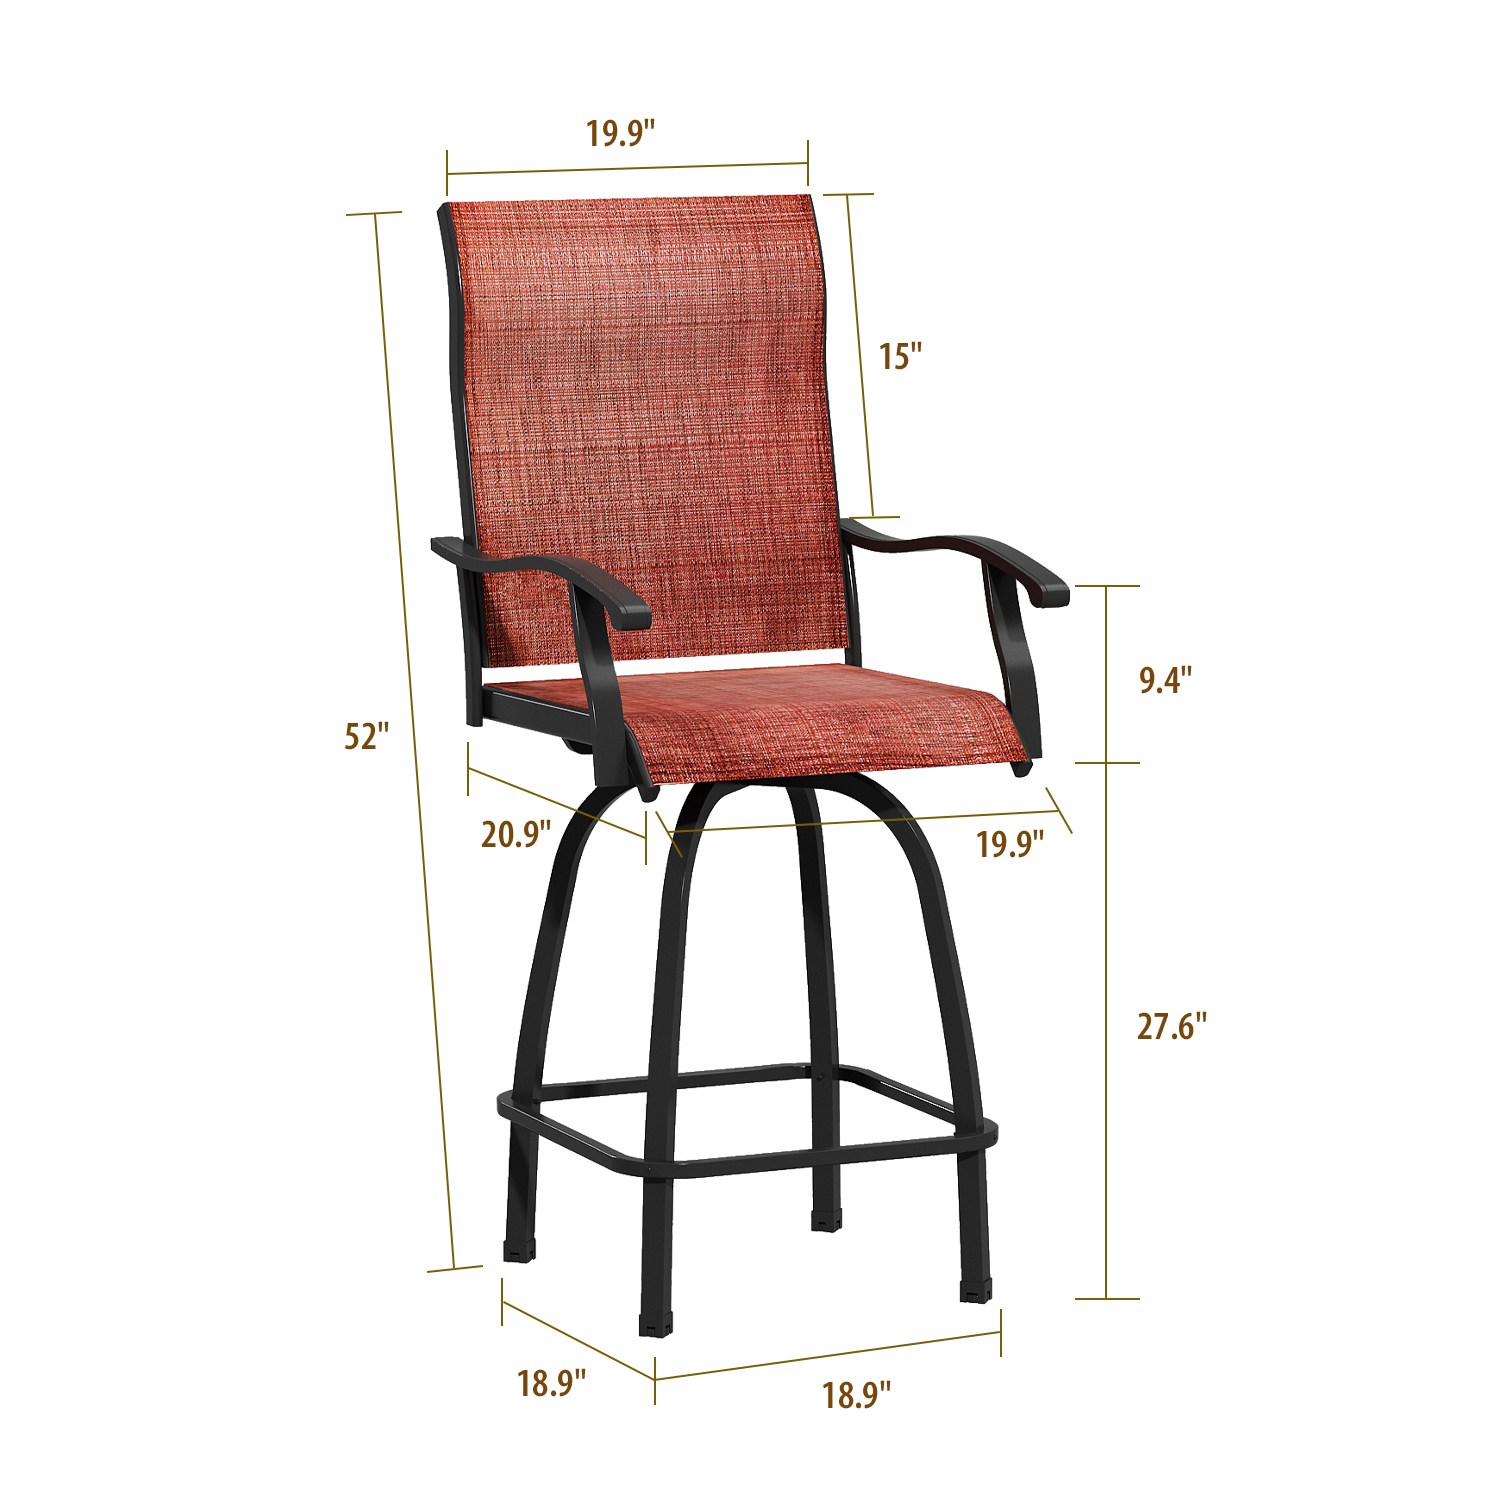 Homsee 2 Pack Patio Swivel Bar Height Patio Bistro Set, 360-Degree Swivel Outdoor Bar Stool, Red - image 5 of 8